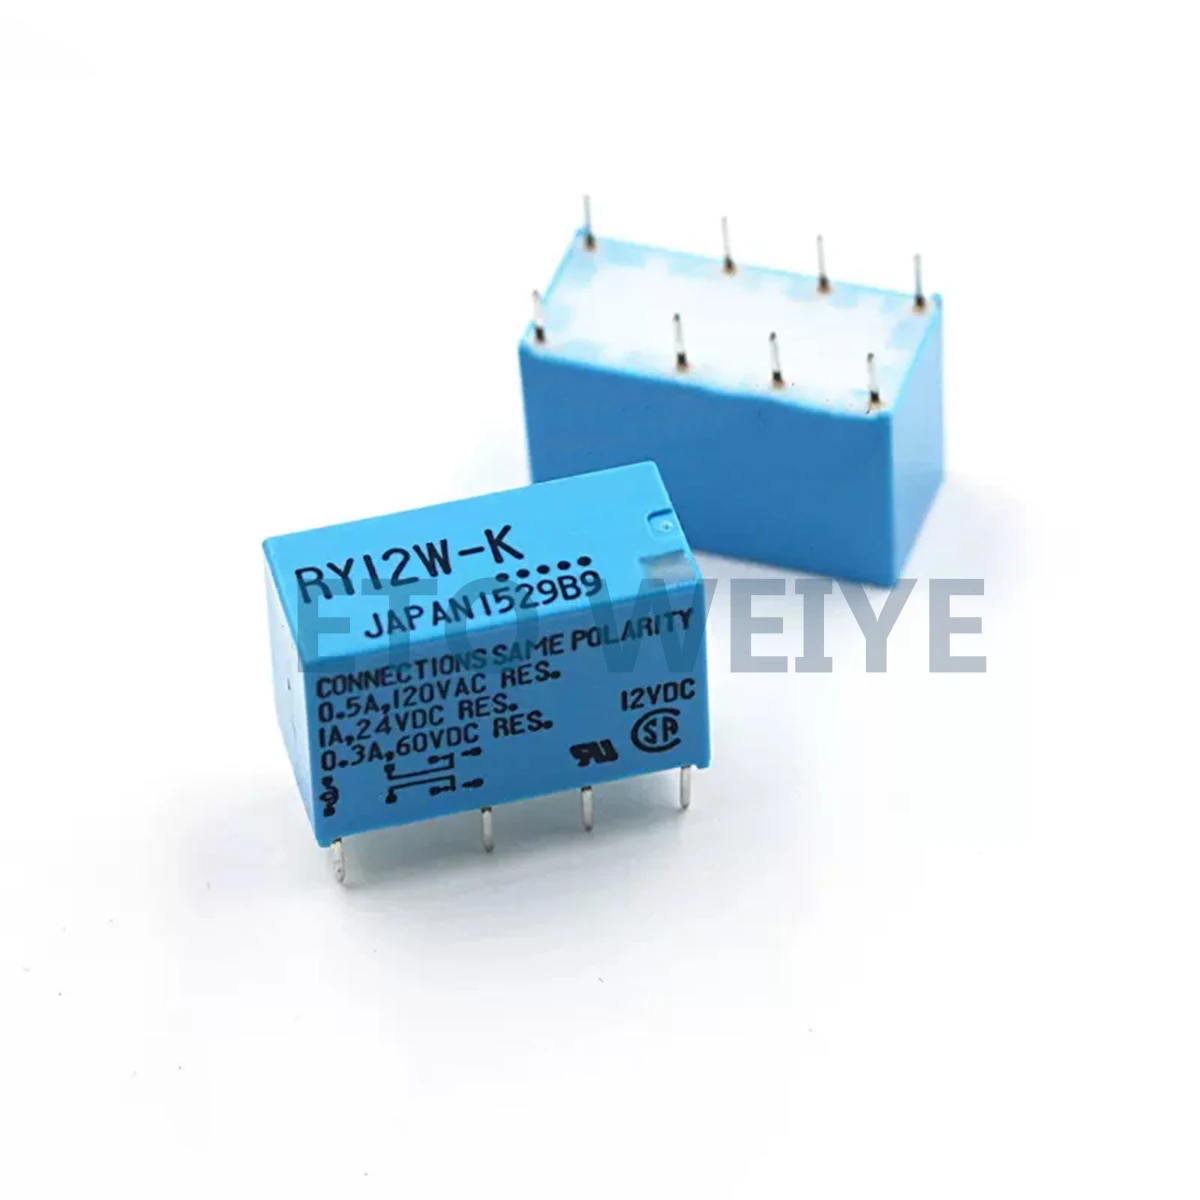 

RY12W-K DIP-8 Two open and two closed signal relays For more information, please contact